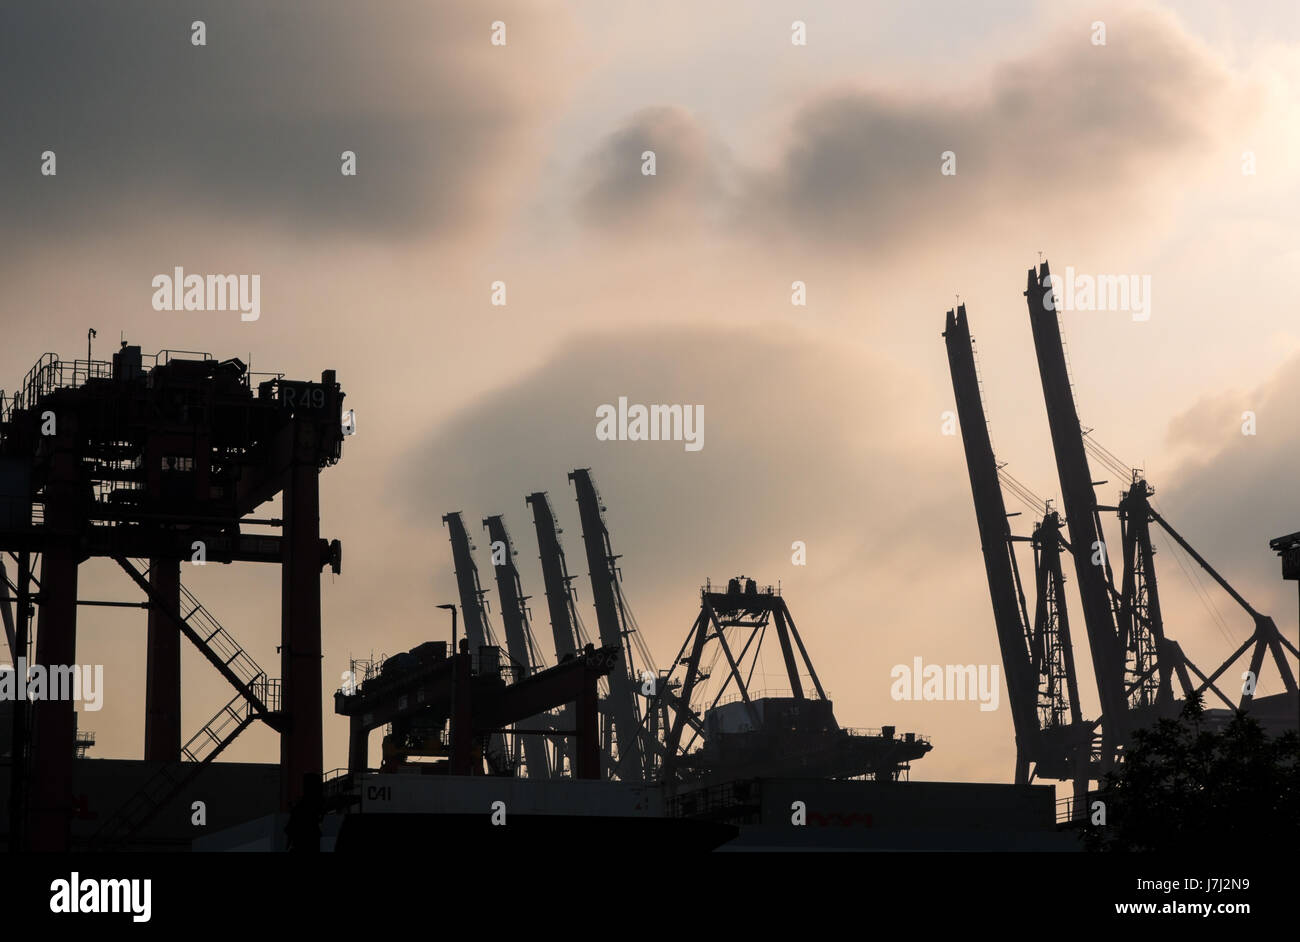 Silhouettes of container cranes at port at sunset Stock Photo